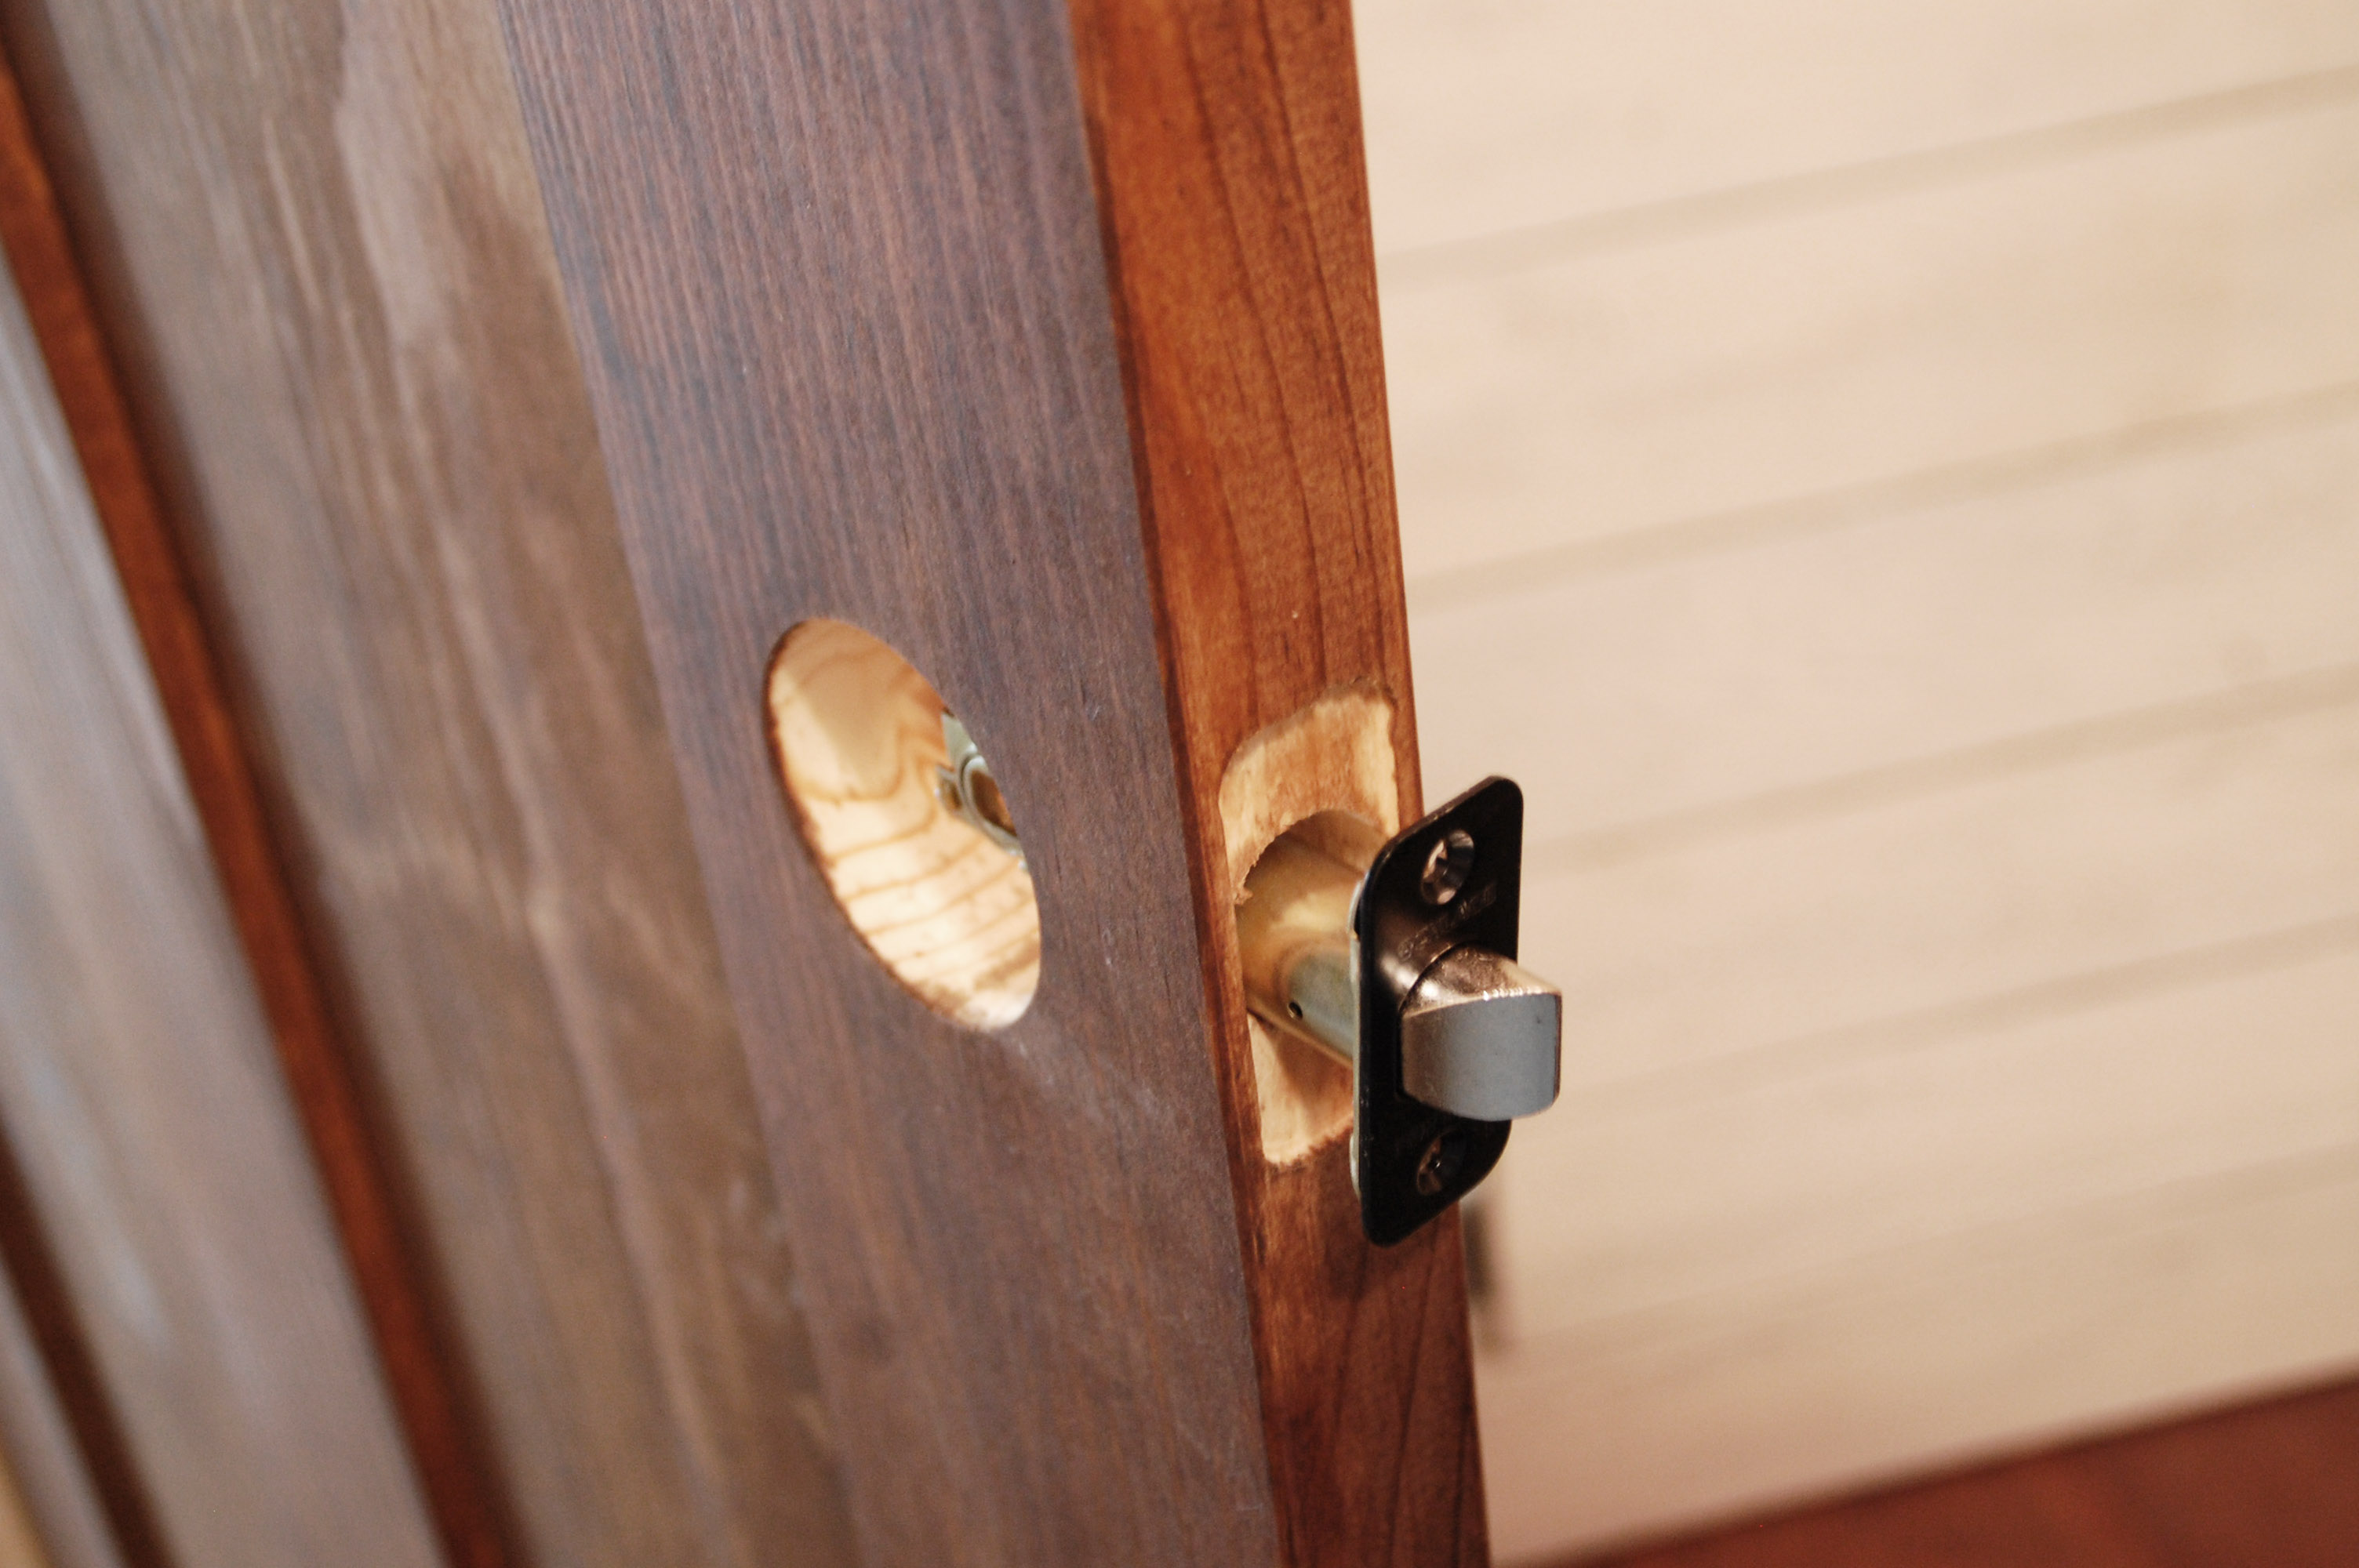 How to Install Door Hardware - Latch Assembly